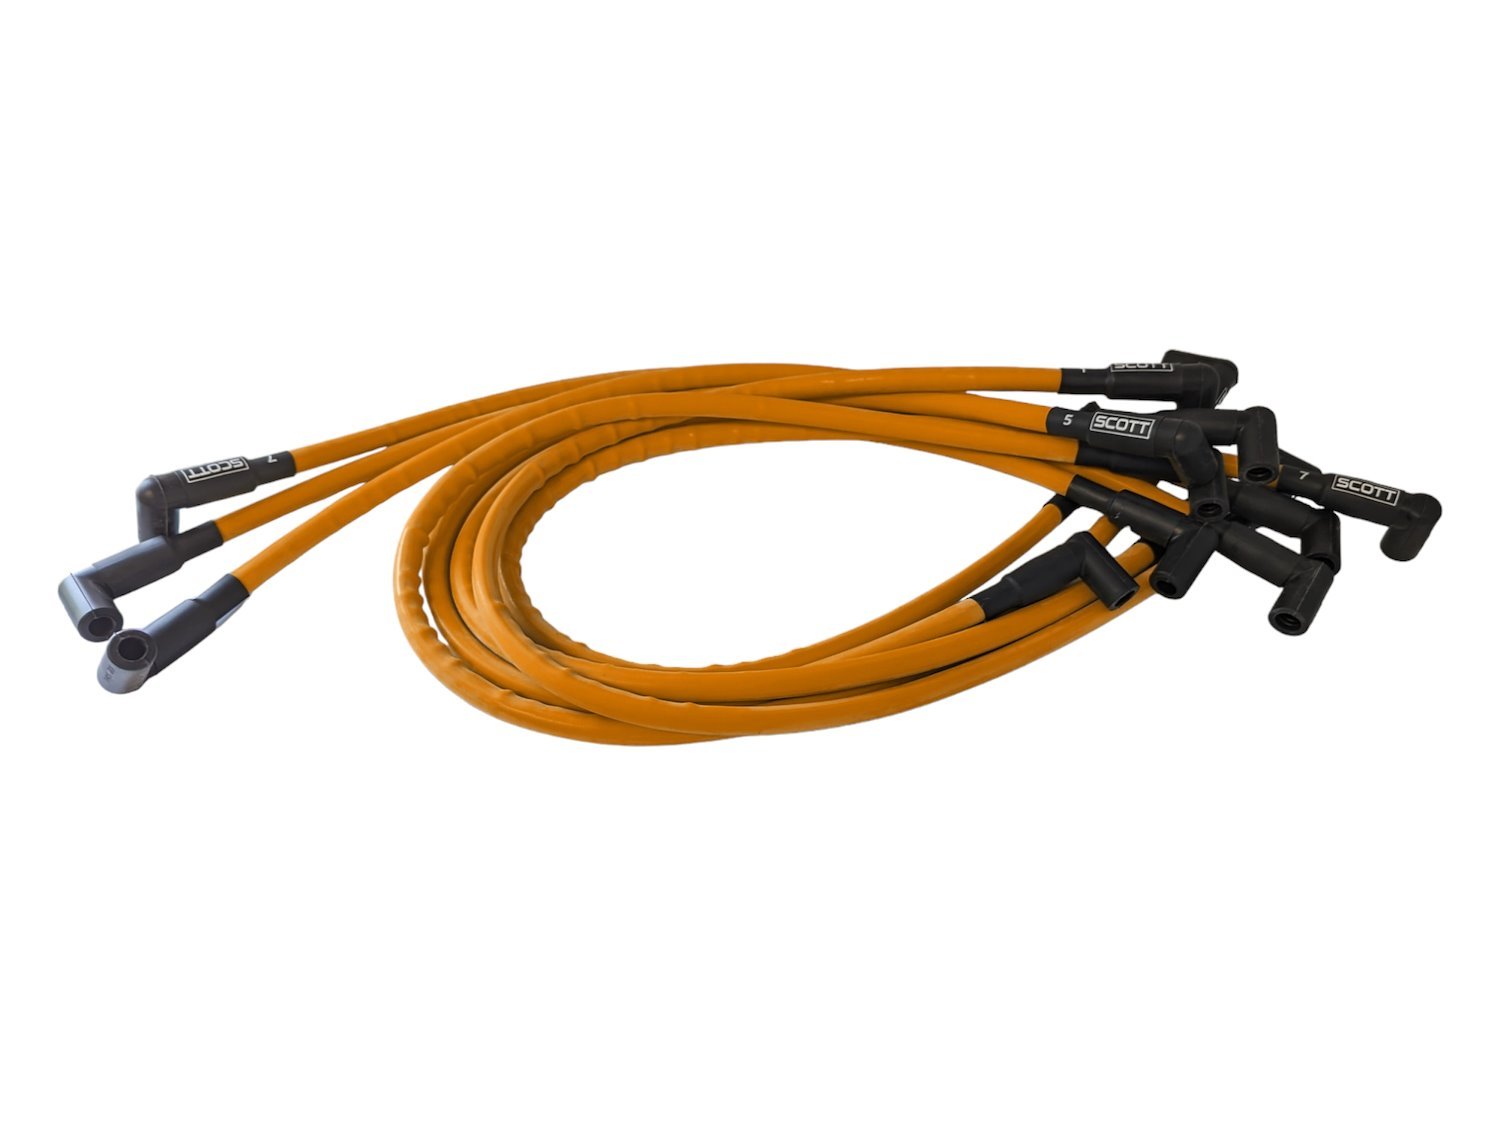 SPW300-CH-437-5 Super Mag Fiberglass-Oversleeved Spark Plug Wire Set for Small Block Chevy, Over & Under [Orange]